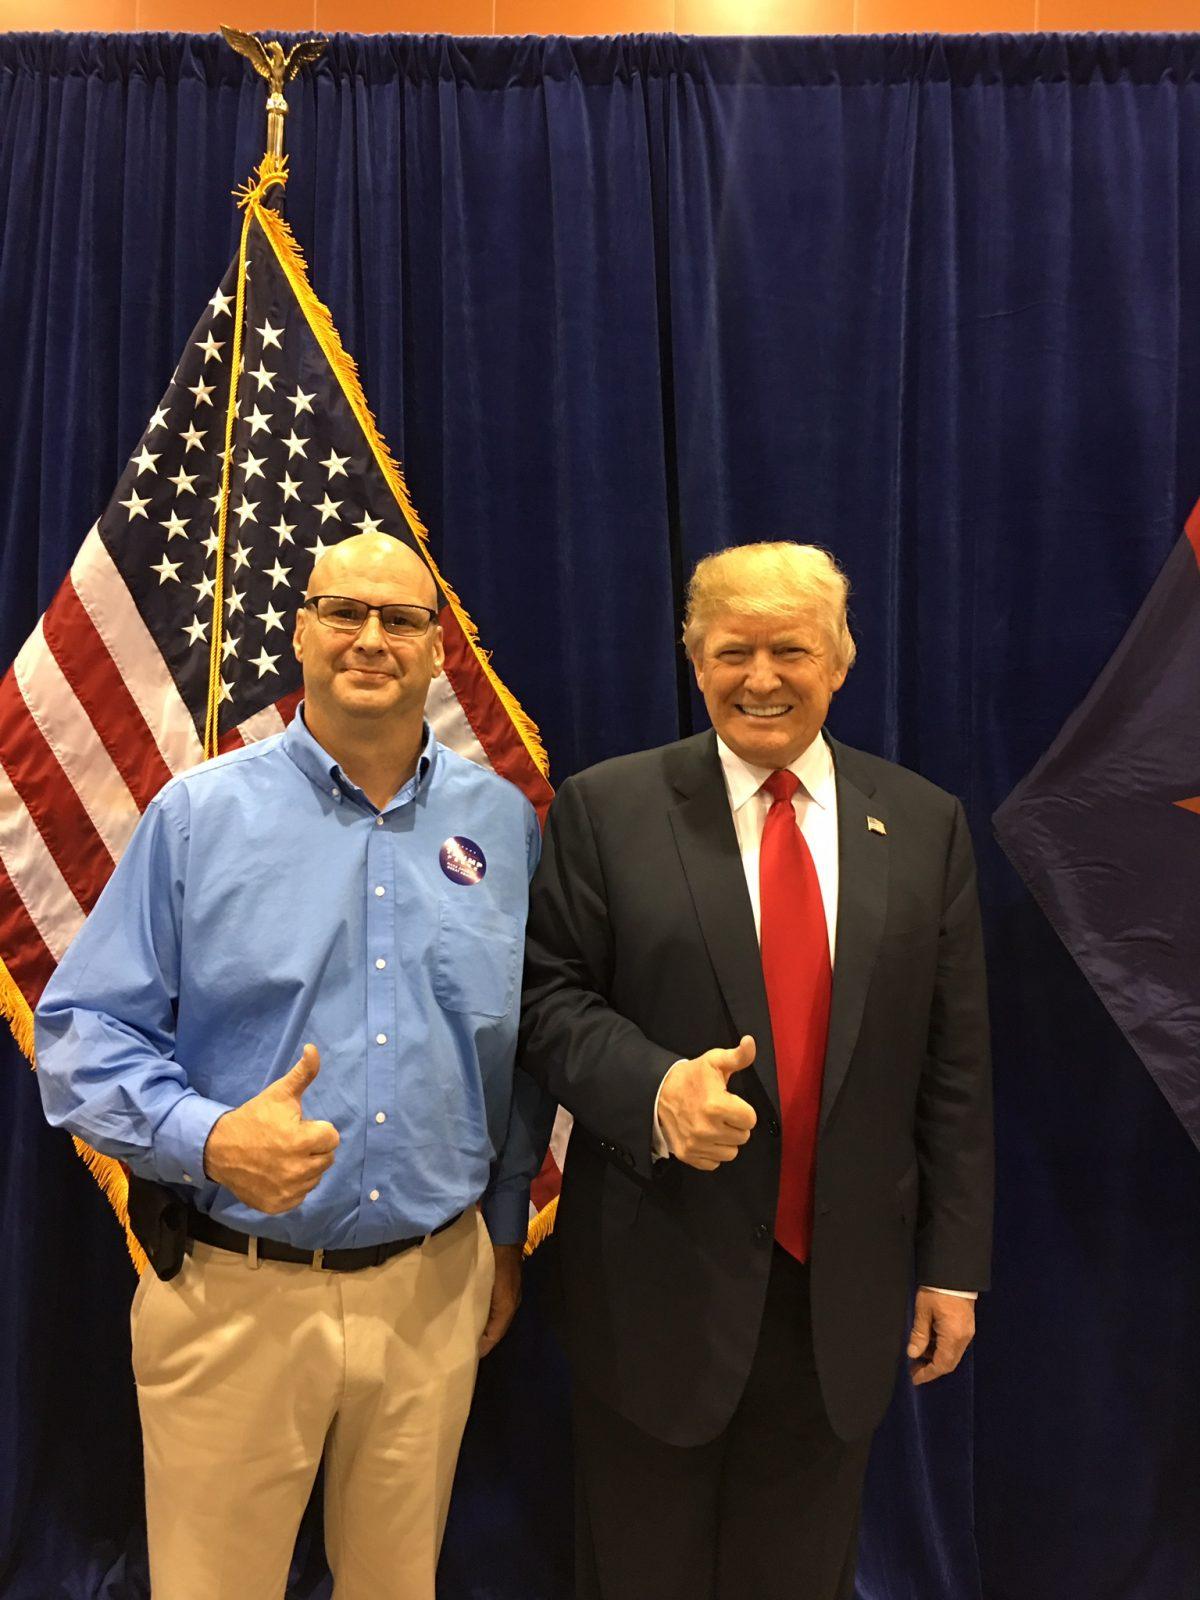 Steve Ronnebeck and President Donald Trump in a file photo. (Courtesy Steve Ronnebeck)